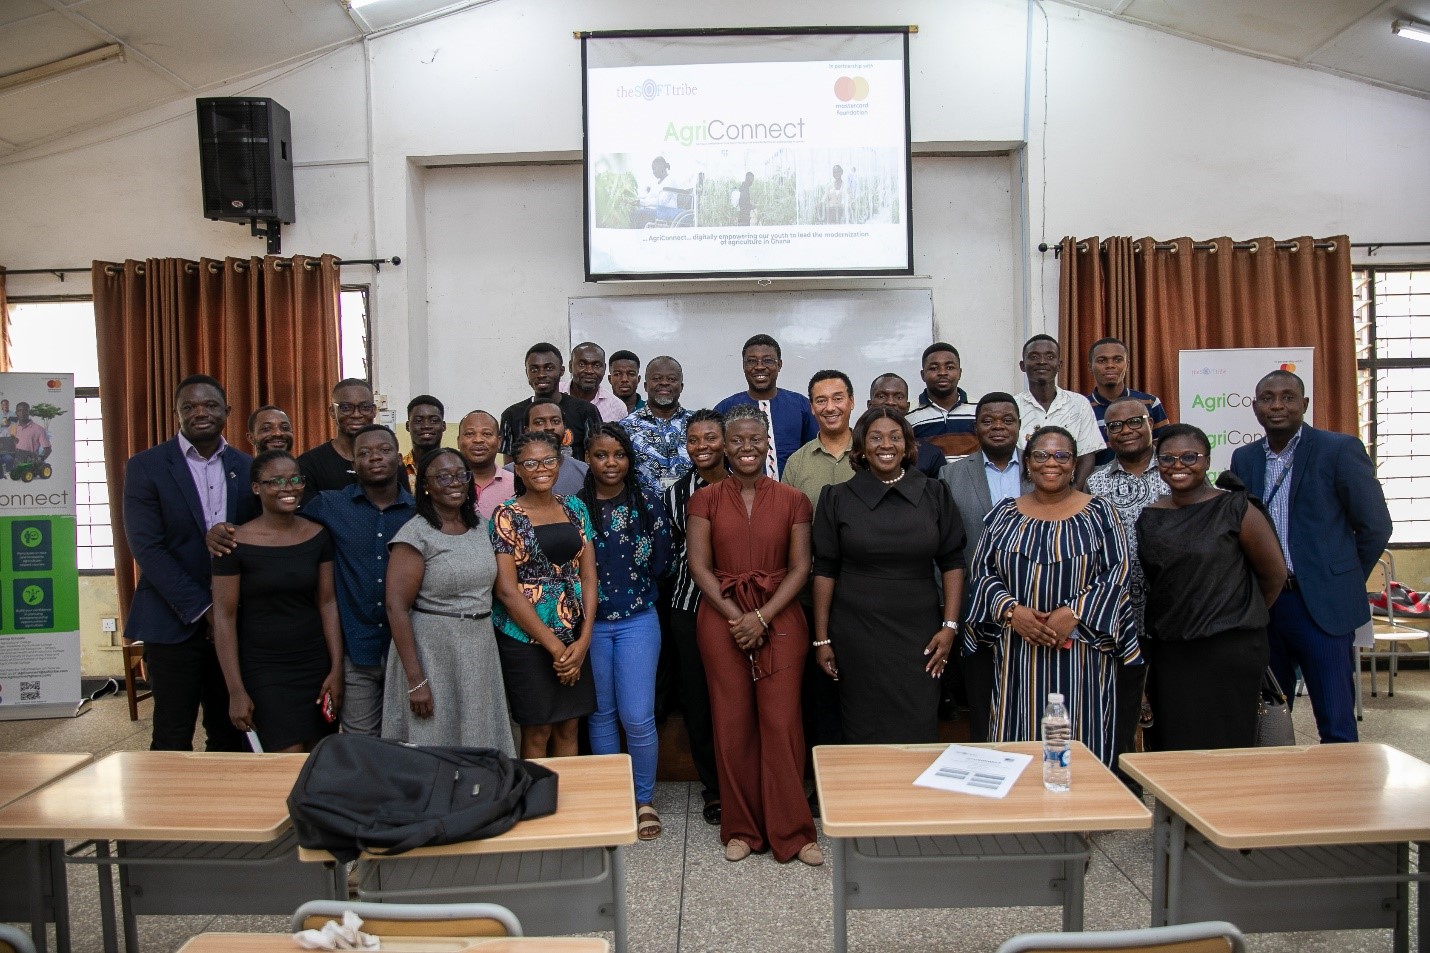 Members of the AgriConnect Team share lens time with faculty and students at the University of Ghana. The University of Ghana was the first stop on the roadshow to distribute laptops and connectivity to students as well as to sensitize them to the overall benefits of AgriConnect.